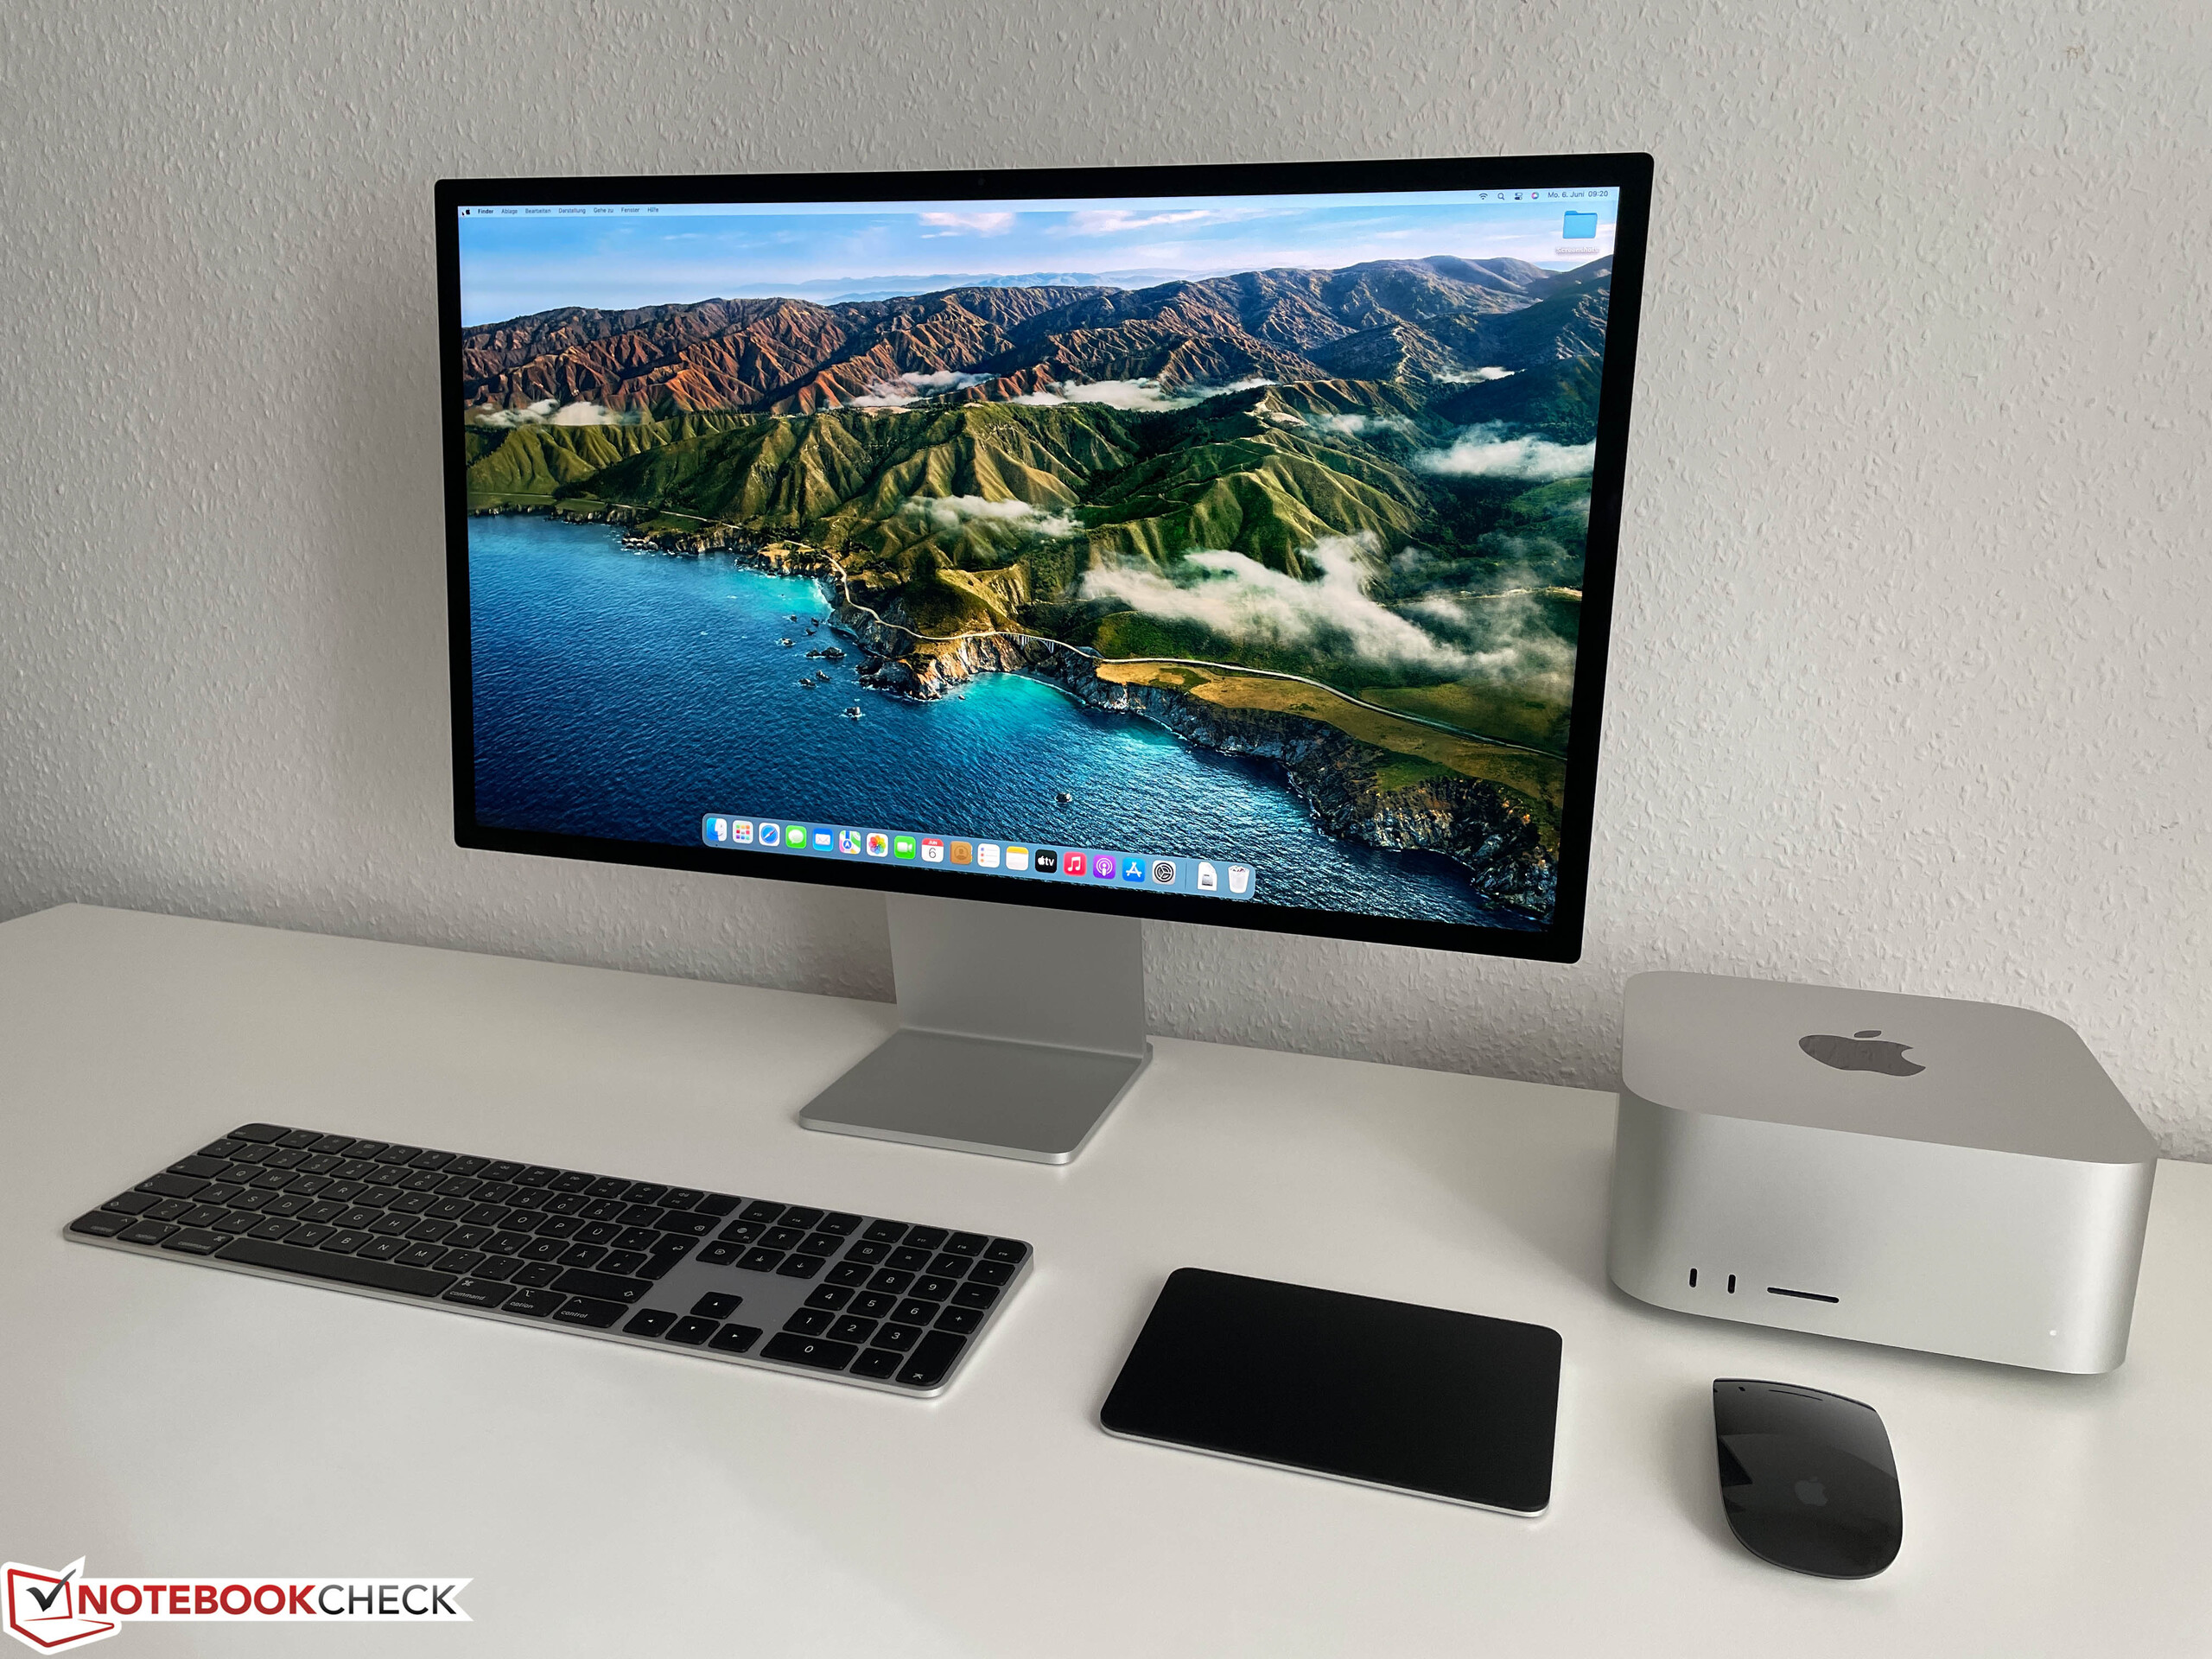 Apple Mac Studio Is a Pricey Desktop PC for Power Users